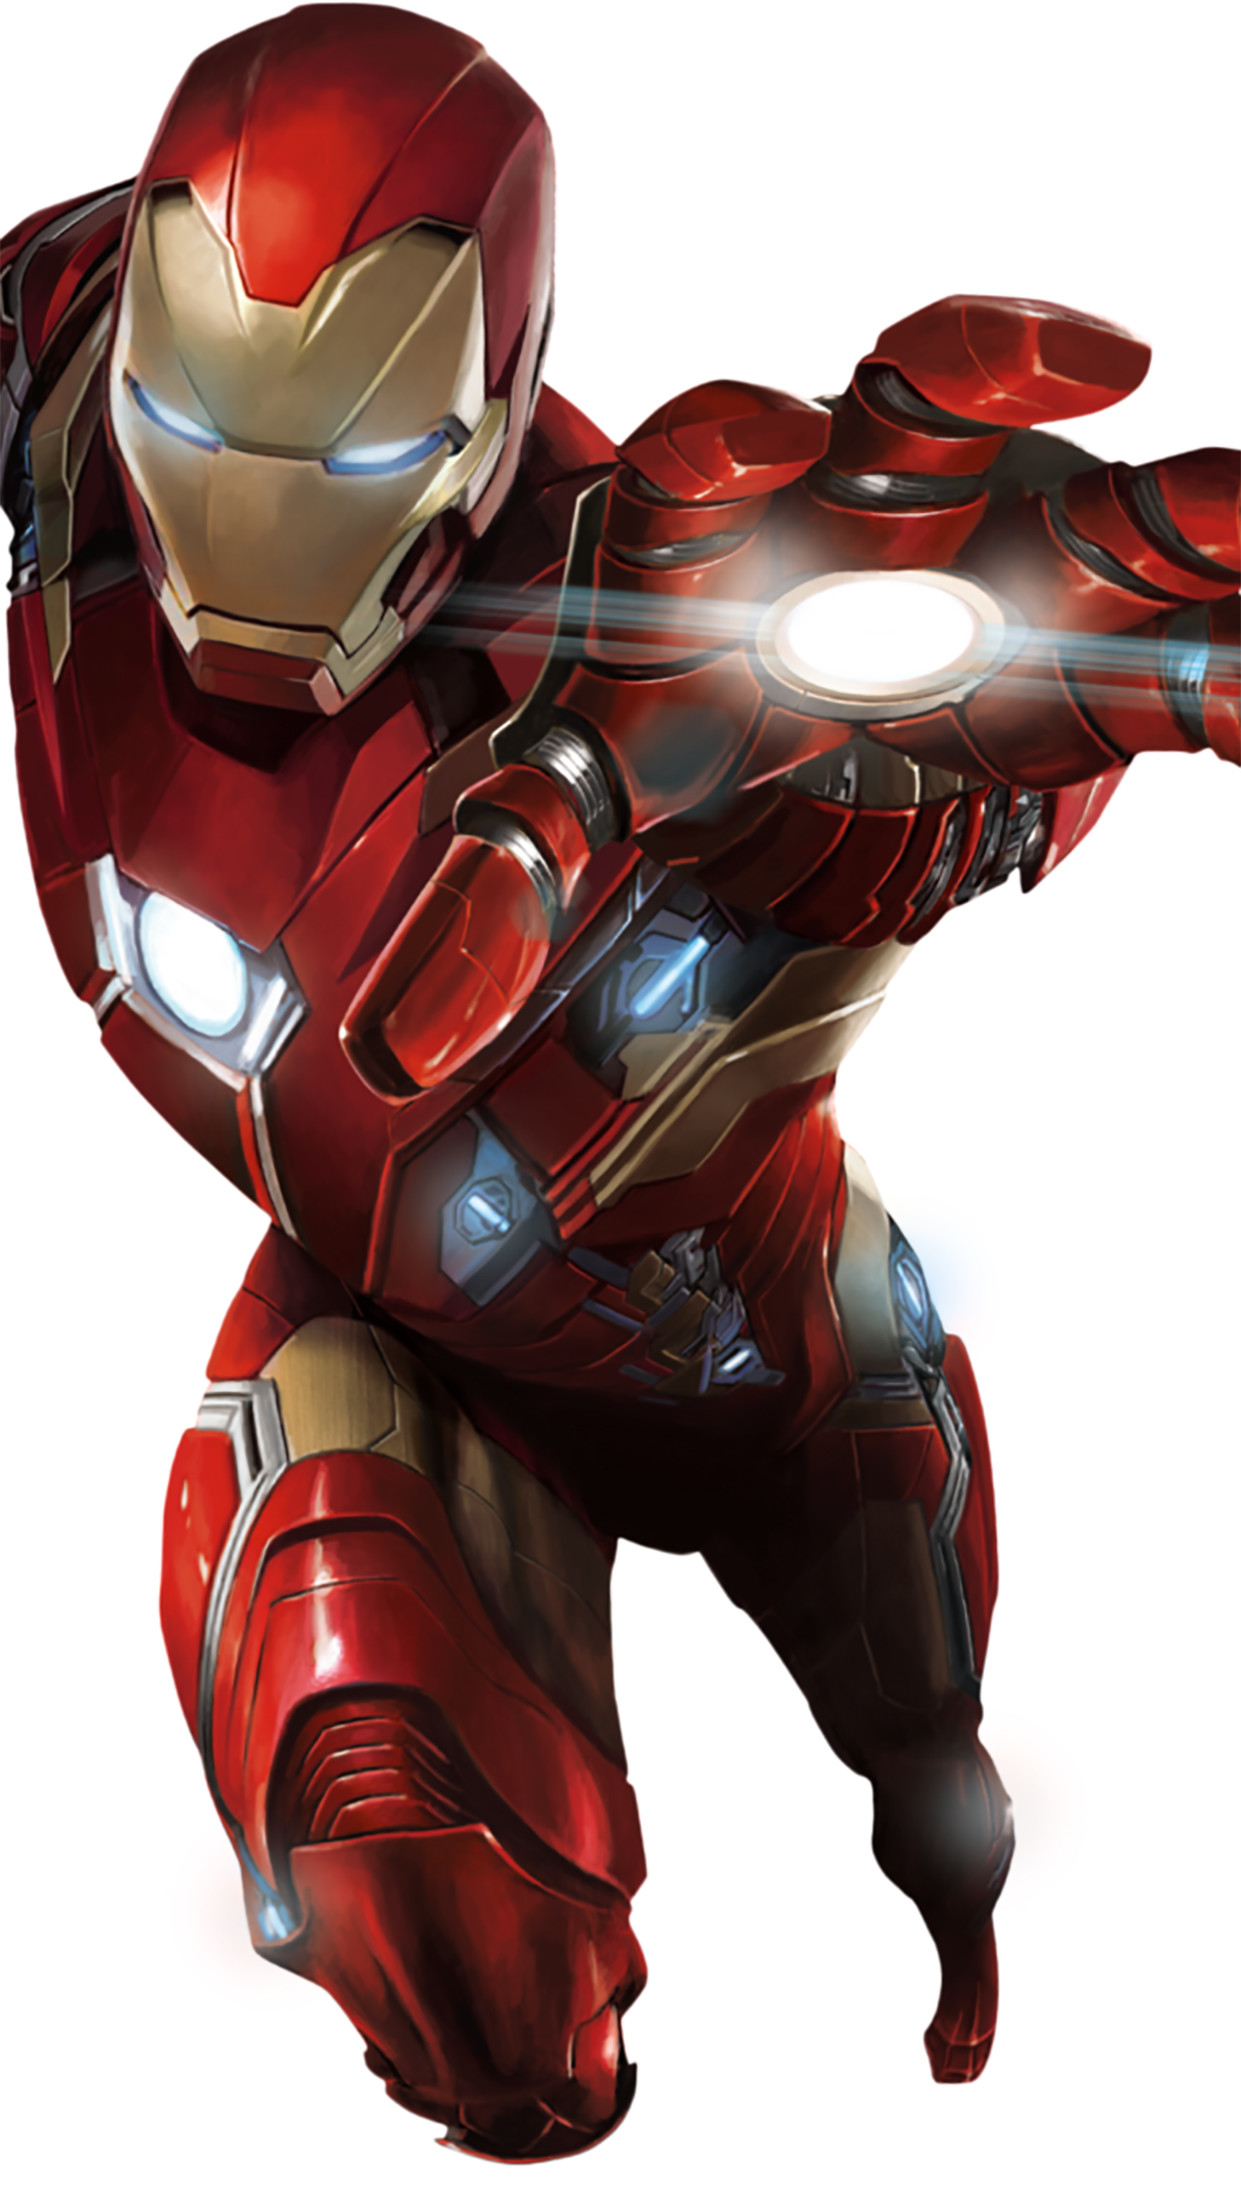 1241x2208 Iron Man Flying 3Wallpapers iPhone Parallax Iron Man : Flying